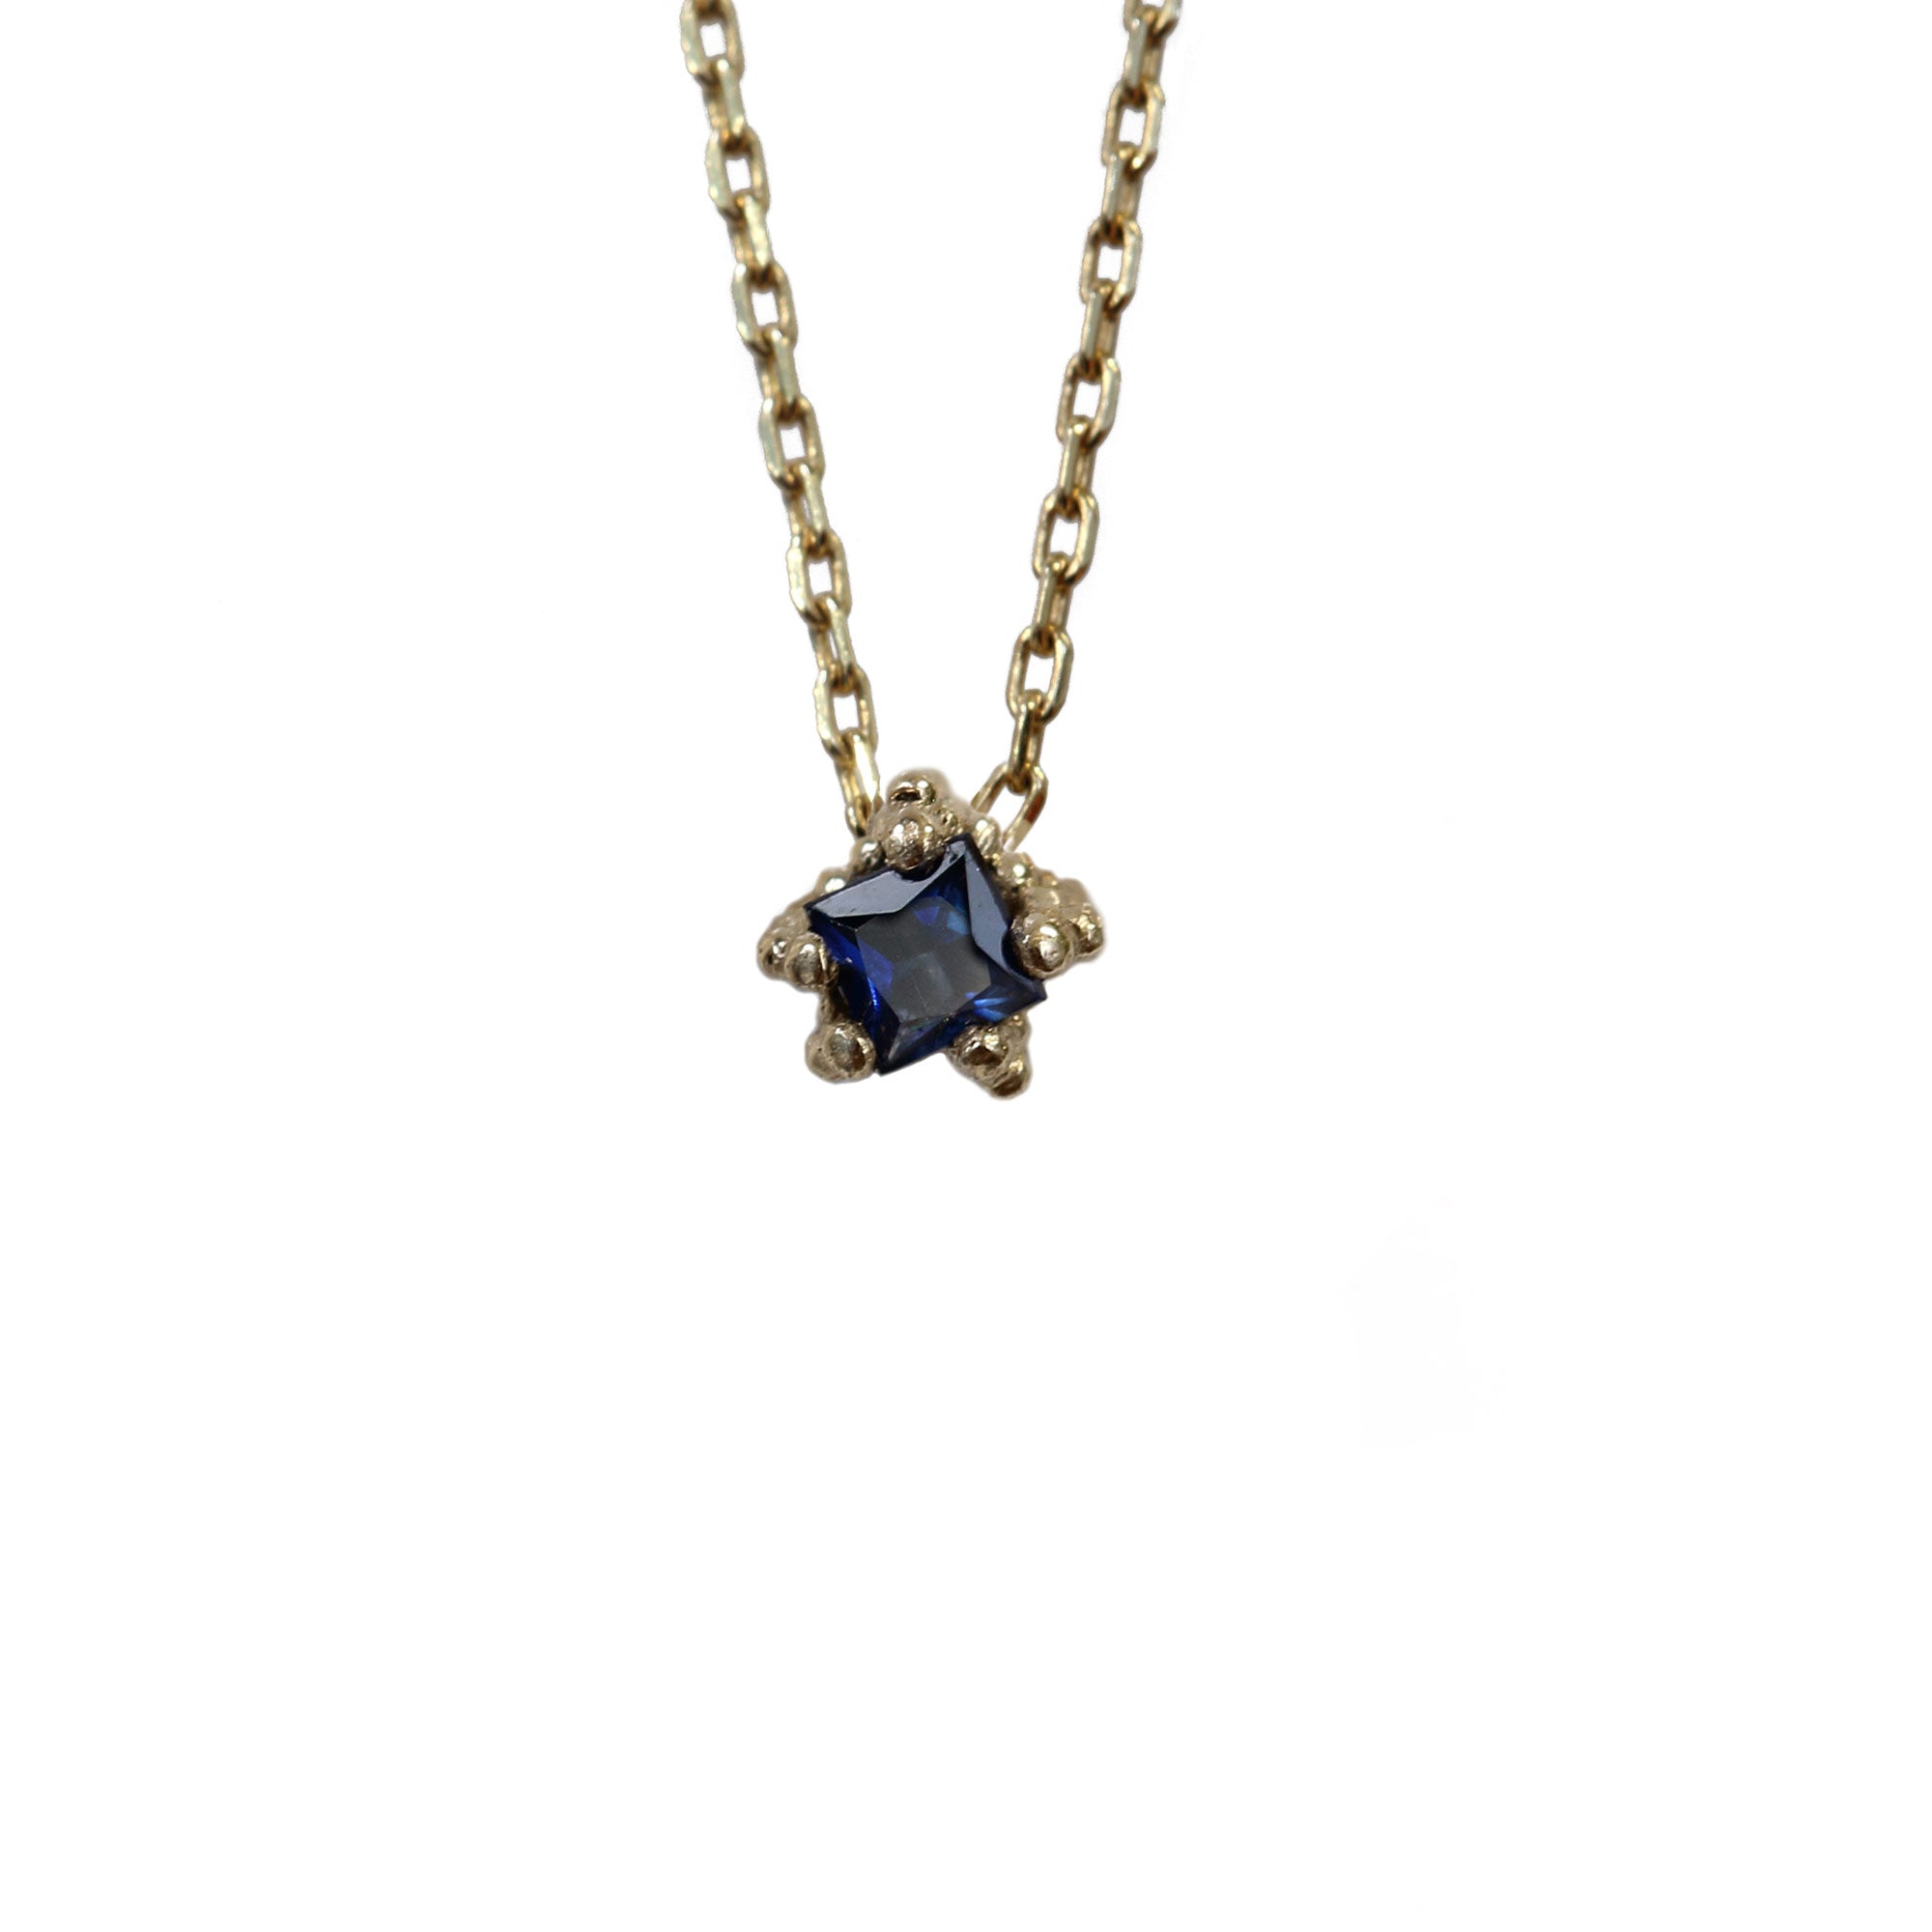 Tiny square cut blue sapphire set in textured gold necklace on white background